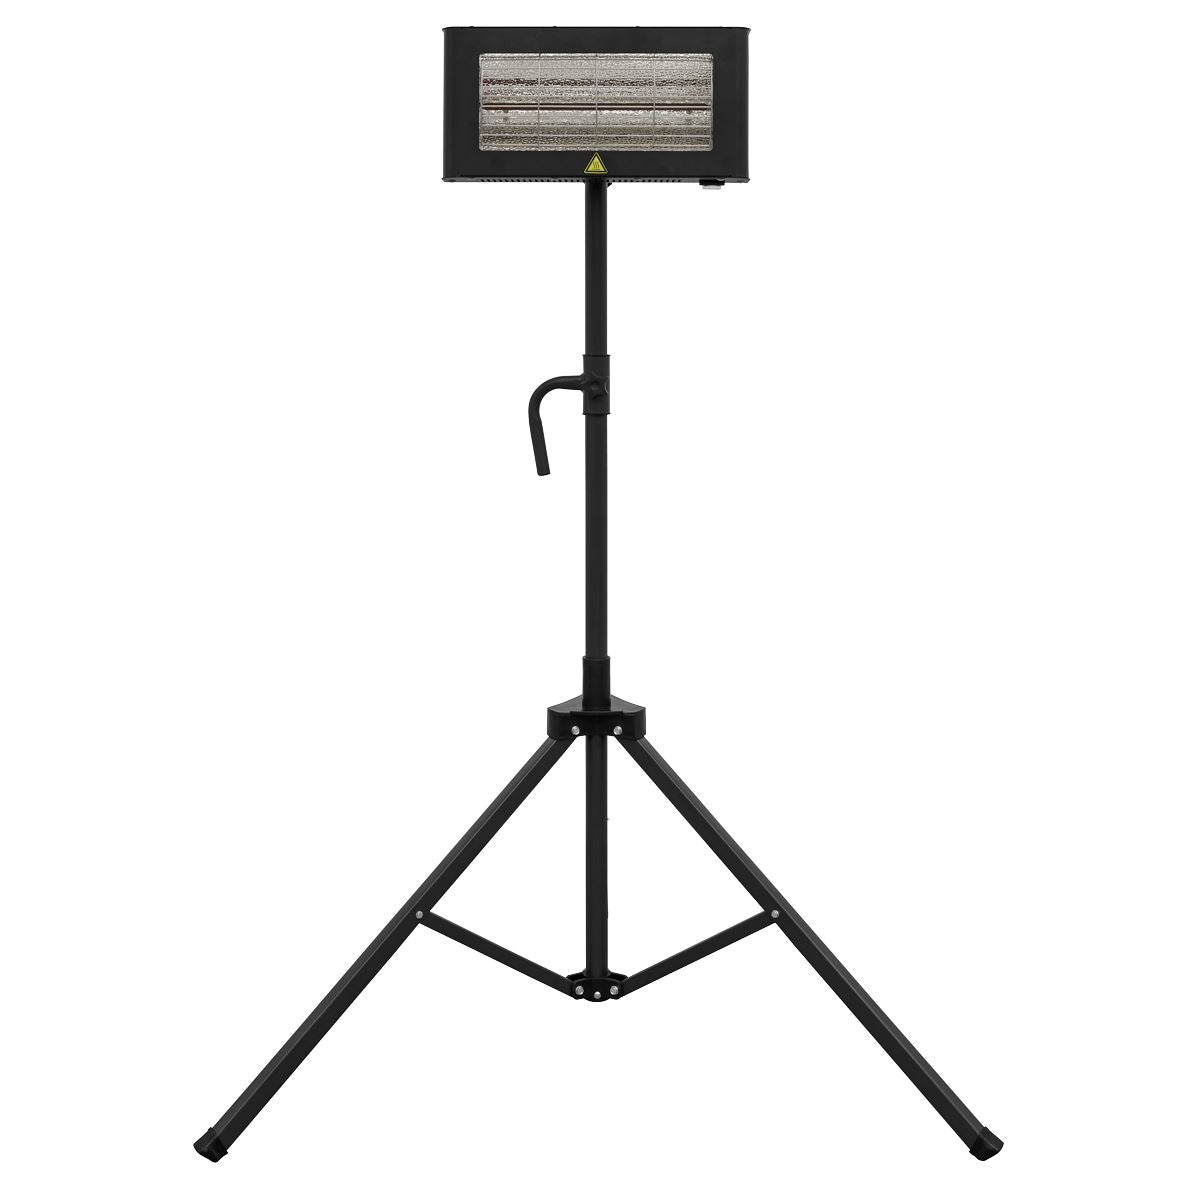 Sealey Infrared Quartz Heater with Tripod Stand 230V 1.2kW